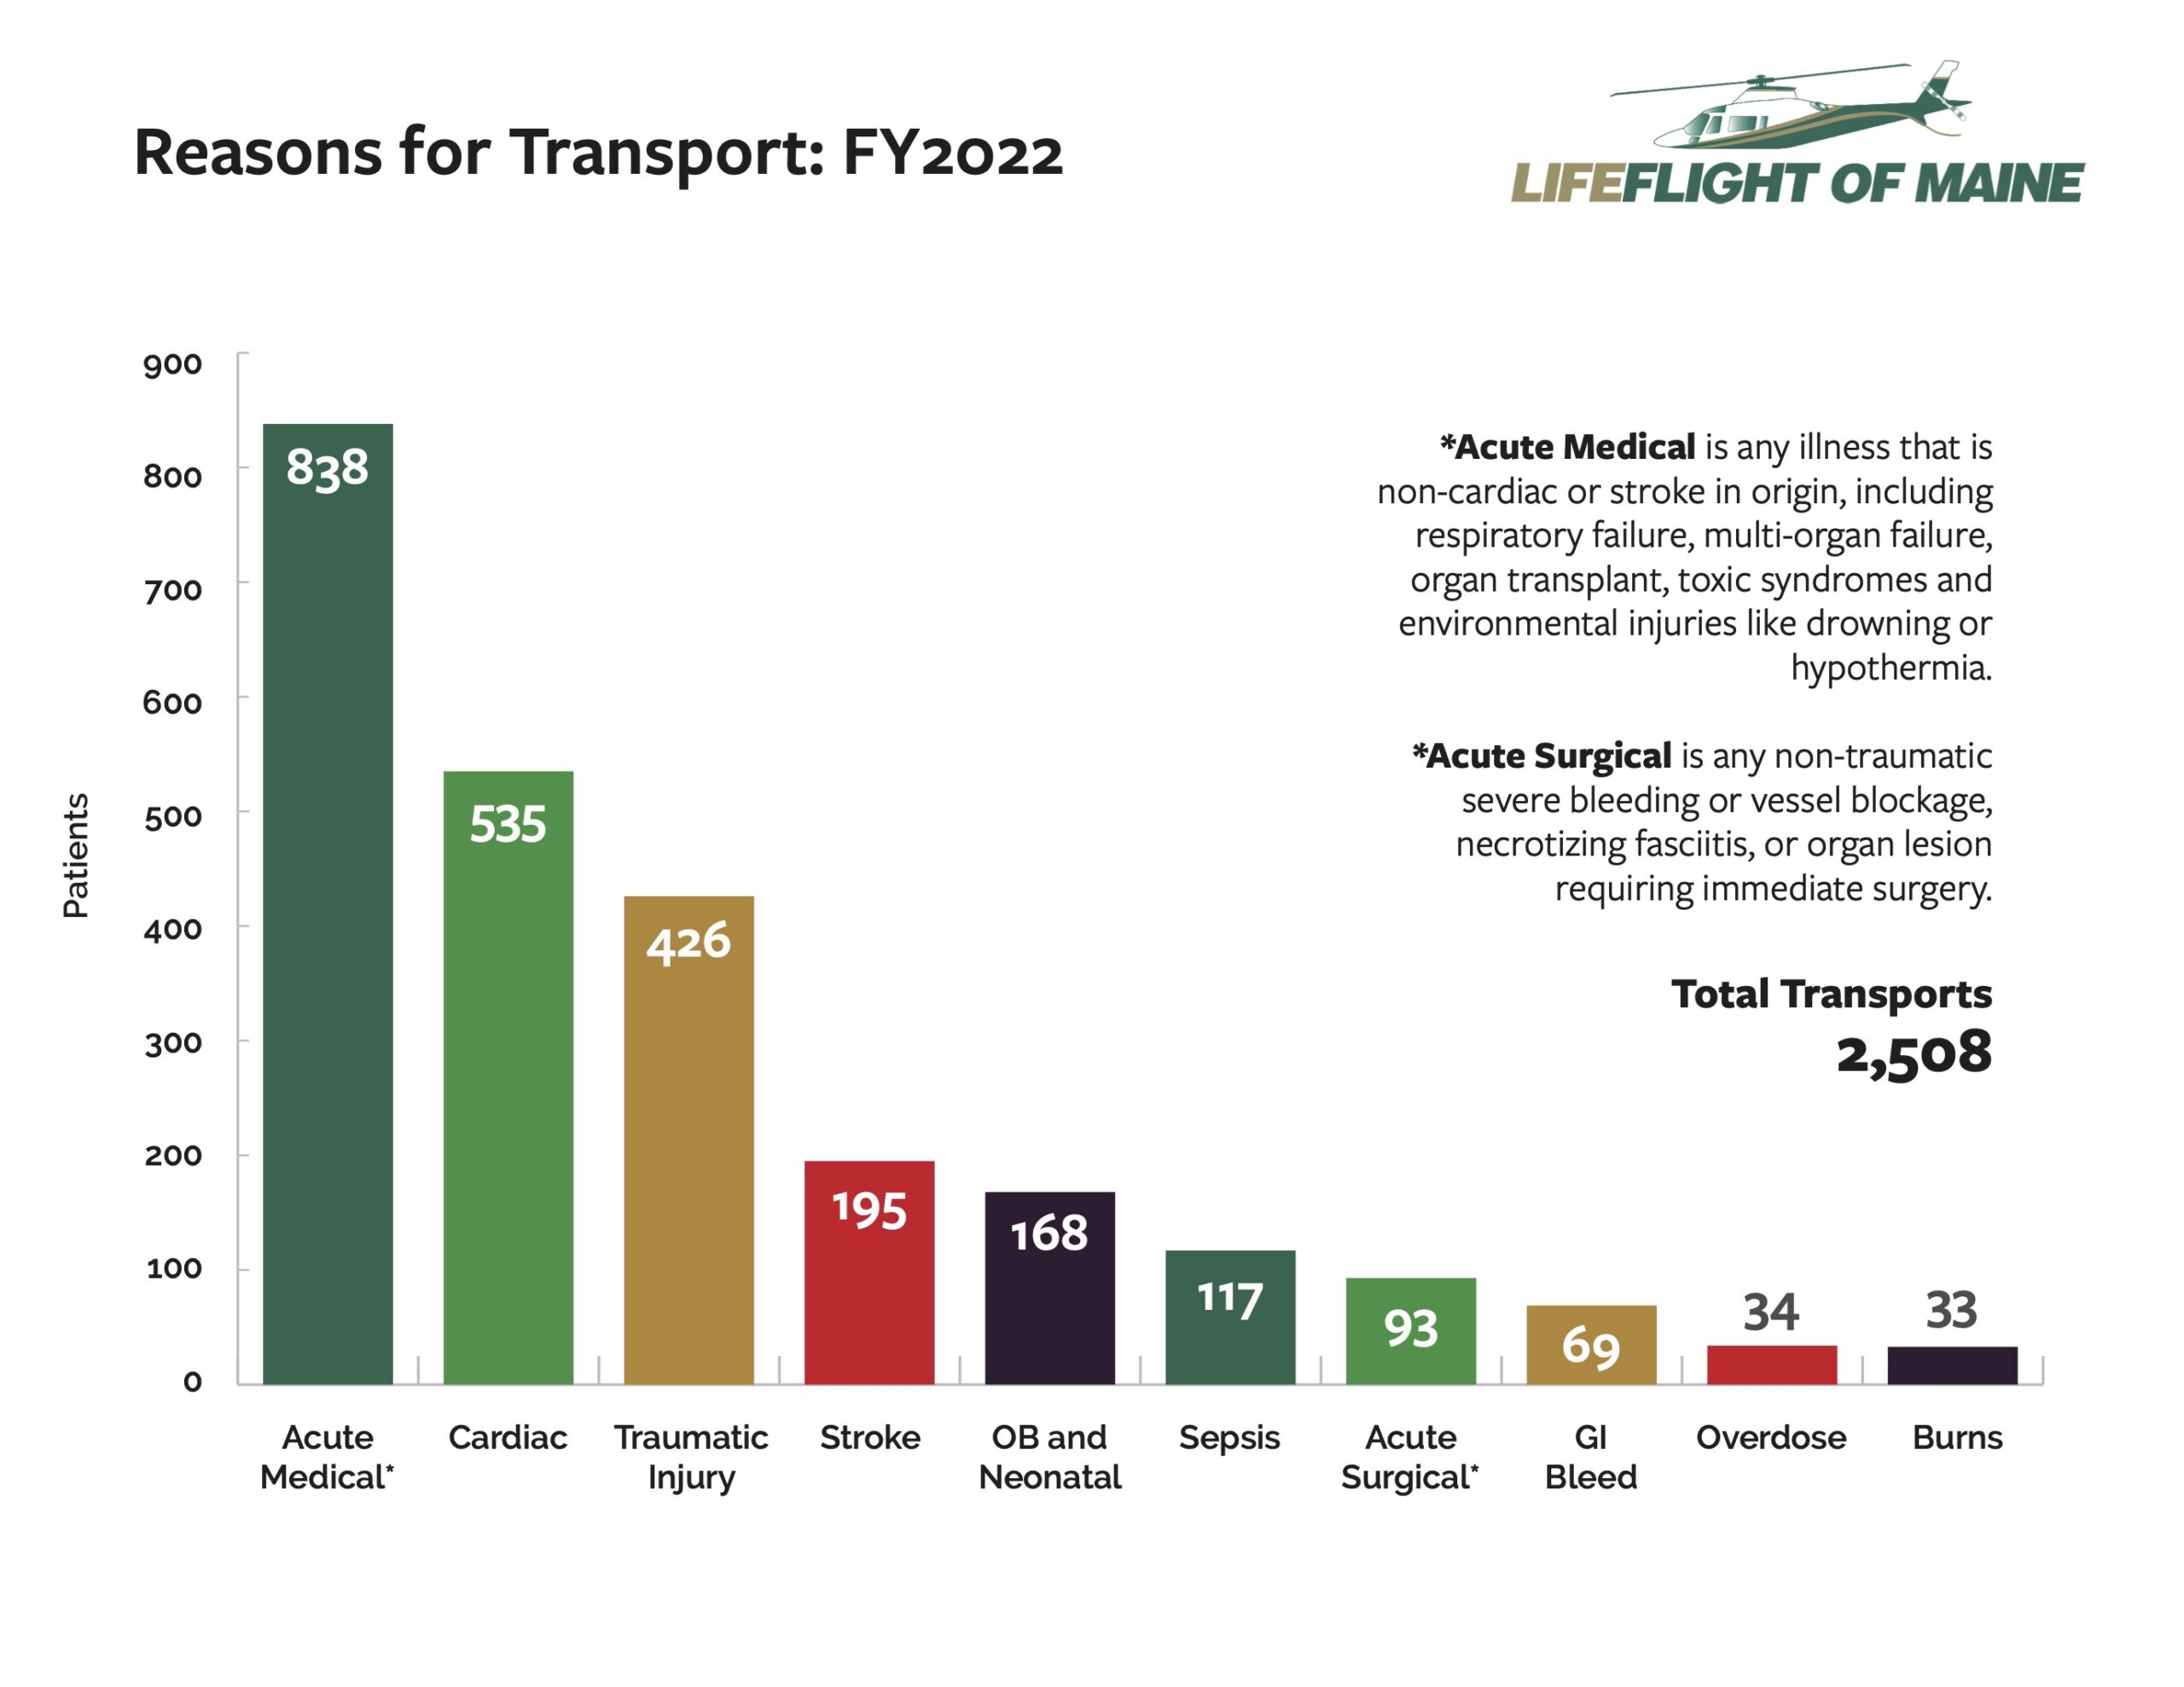 Reasons for Transport: FY2022 - LifeFlight of Maine 